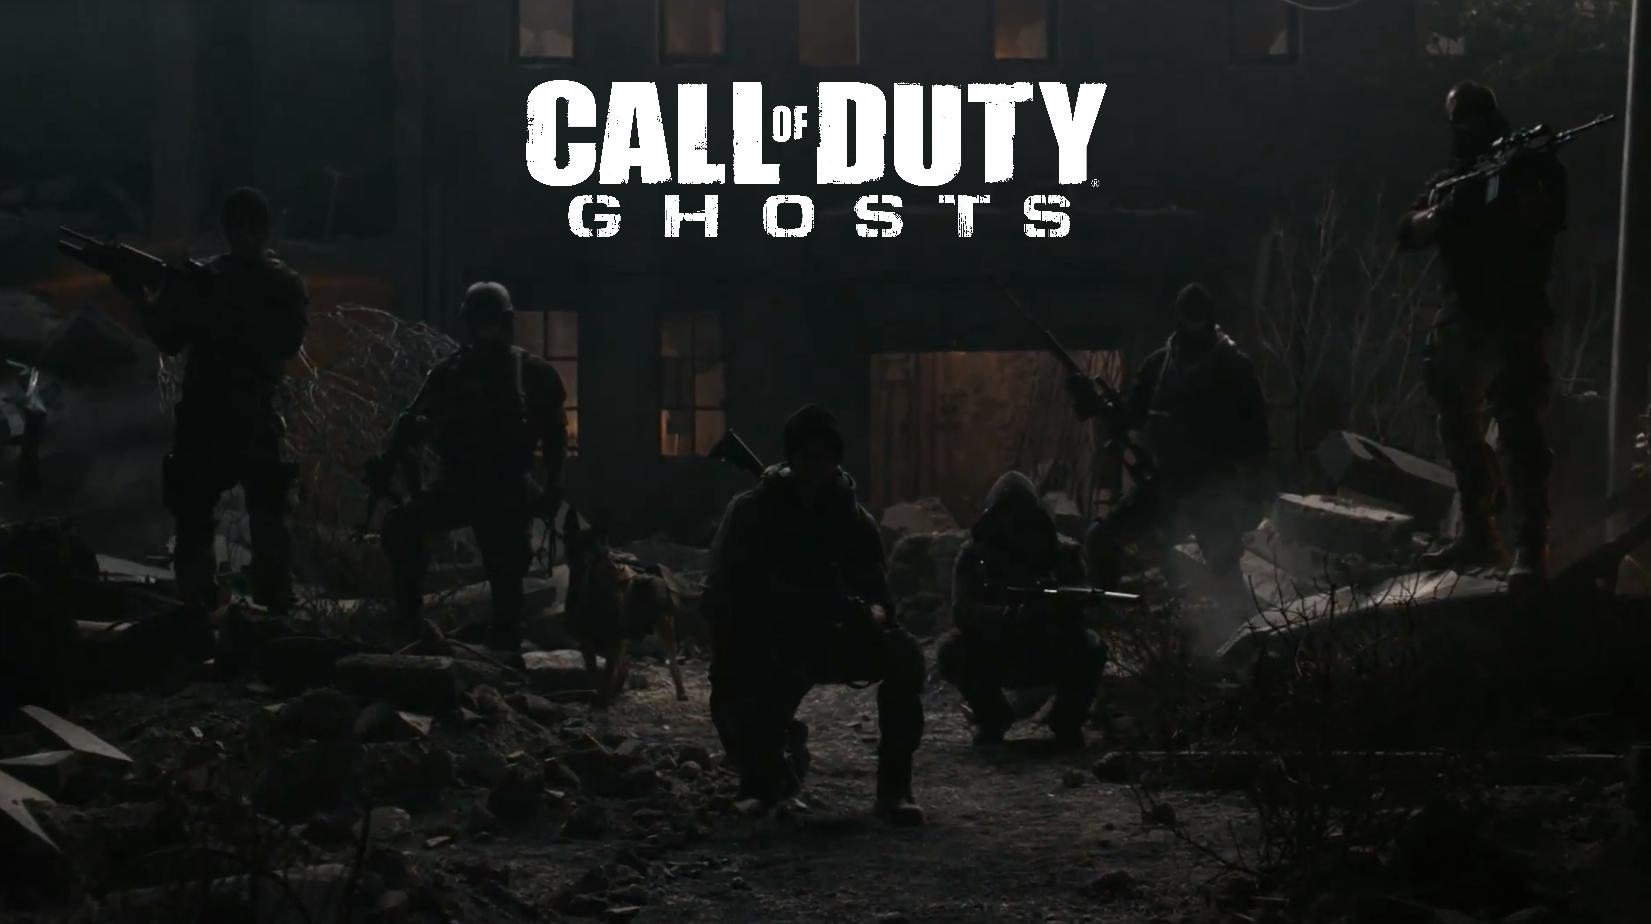 call of duty ghosts hd wallpaper High Quality WallpapersWallpaper